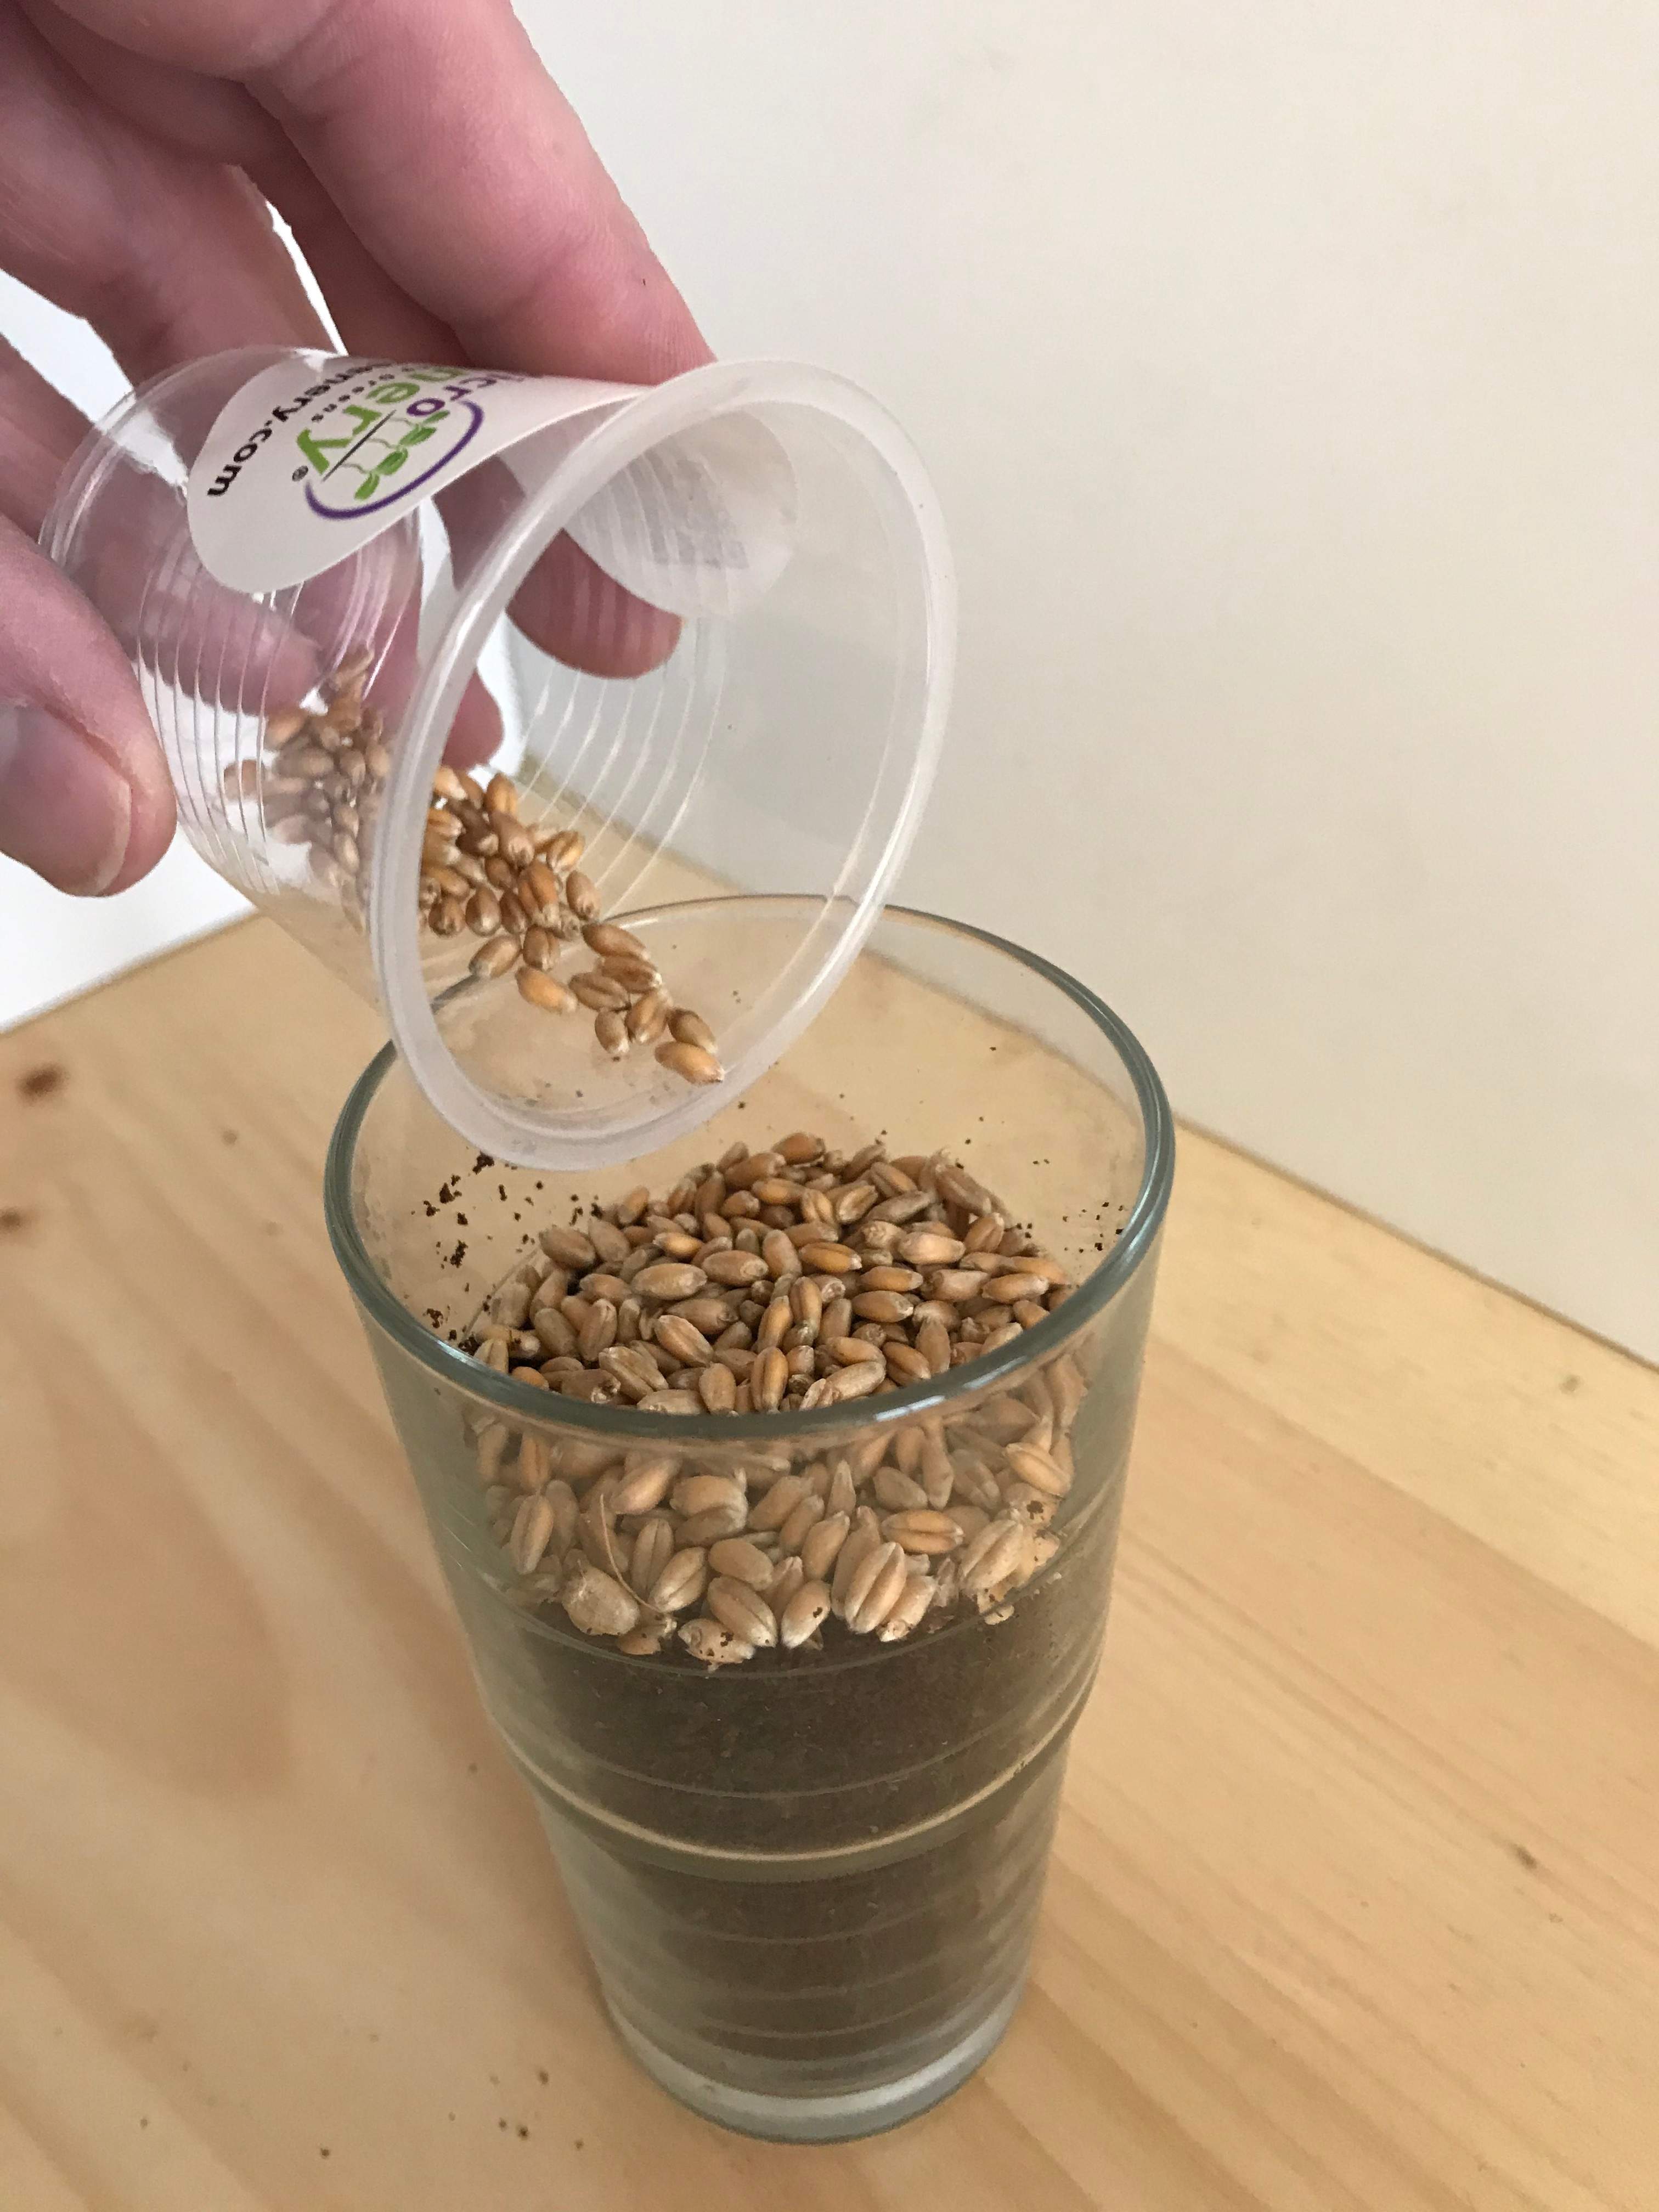 Pour seeds on top of fiber